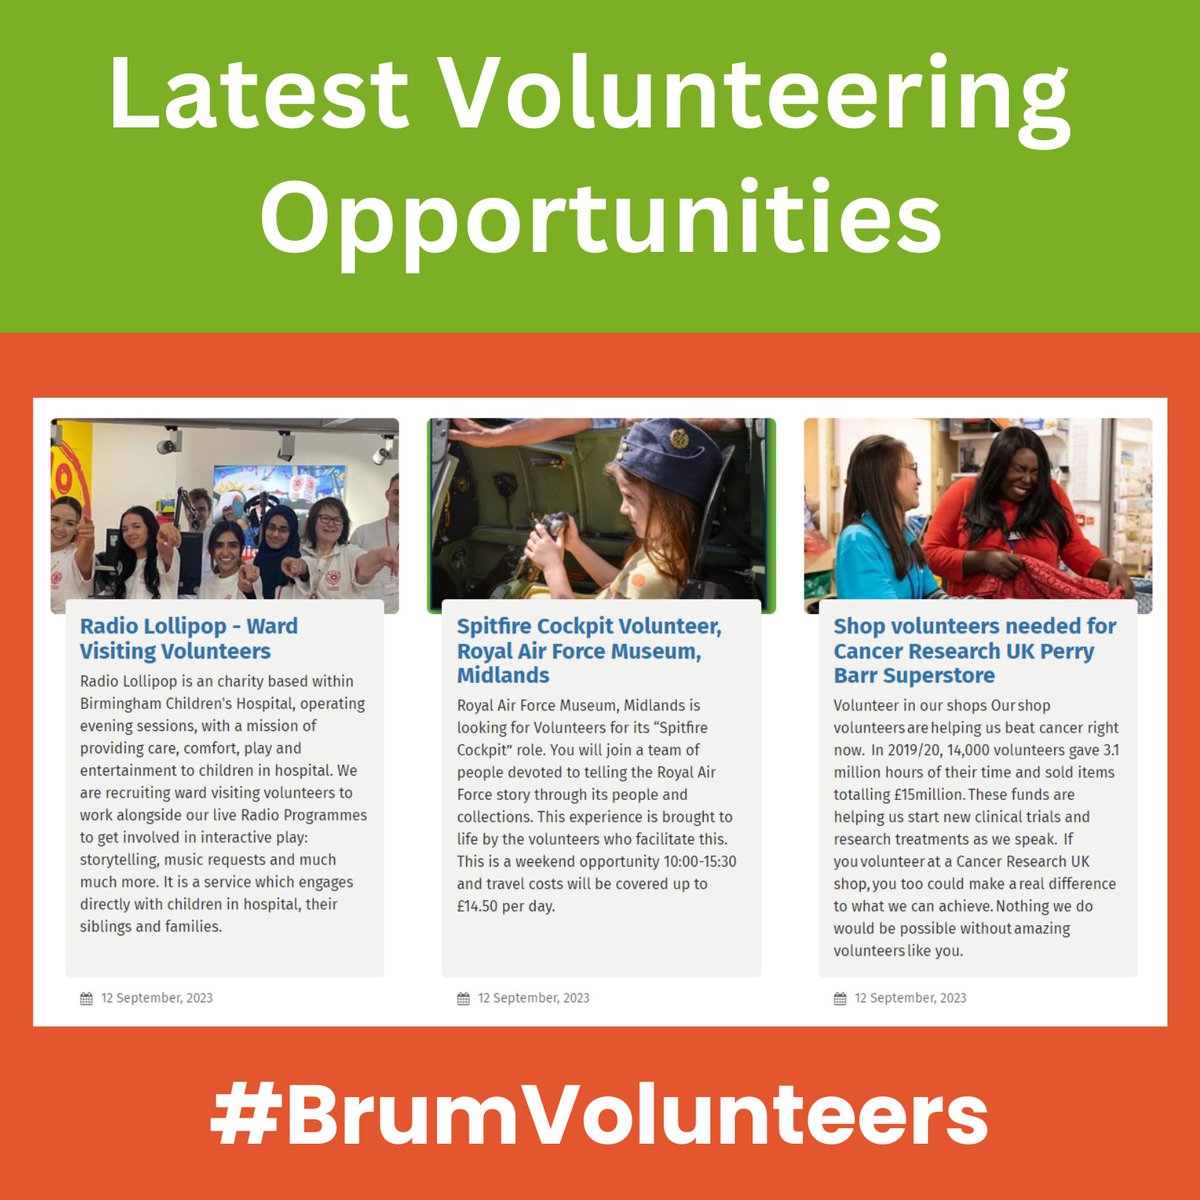 These 3 #volunteering roles posted today demonstrate the wide range and diversity of roles available in and around Brum.

If you're looking to volunteer, check out our online community noticeboard.
bit.ly/3LmiTuC

#BrumVolunteers @radiolollipop @Bham_Childrens @CR_UK